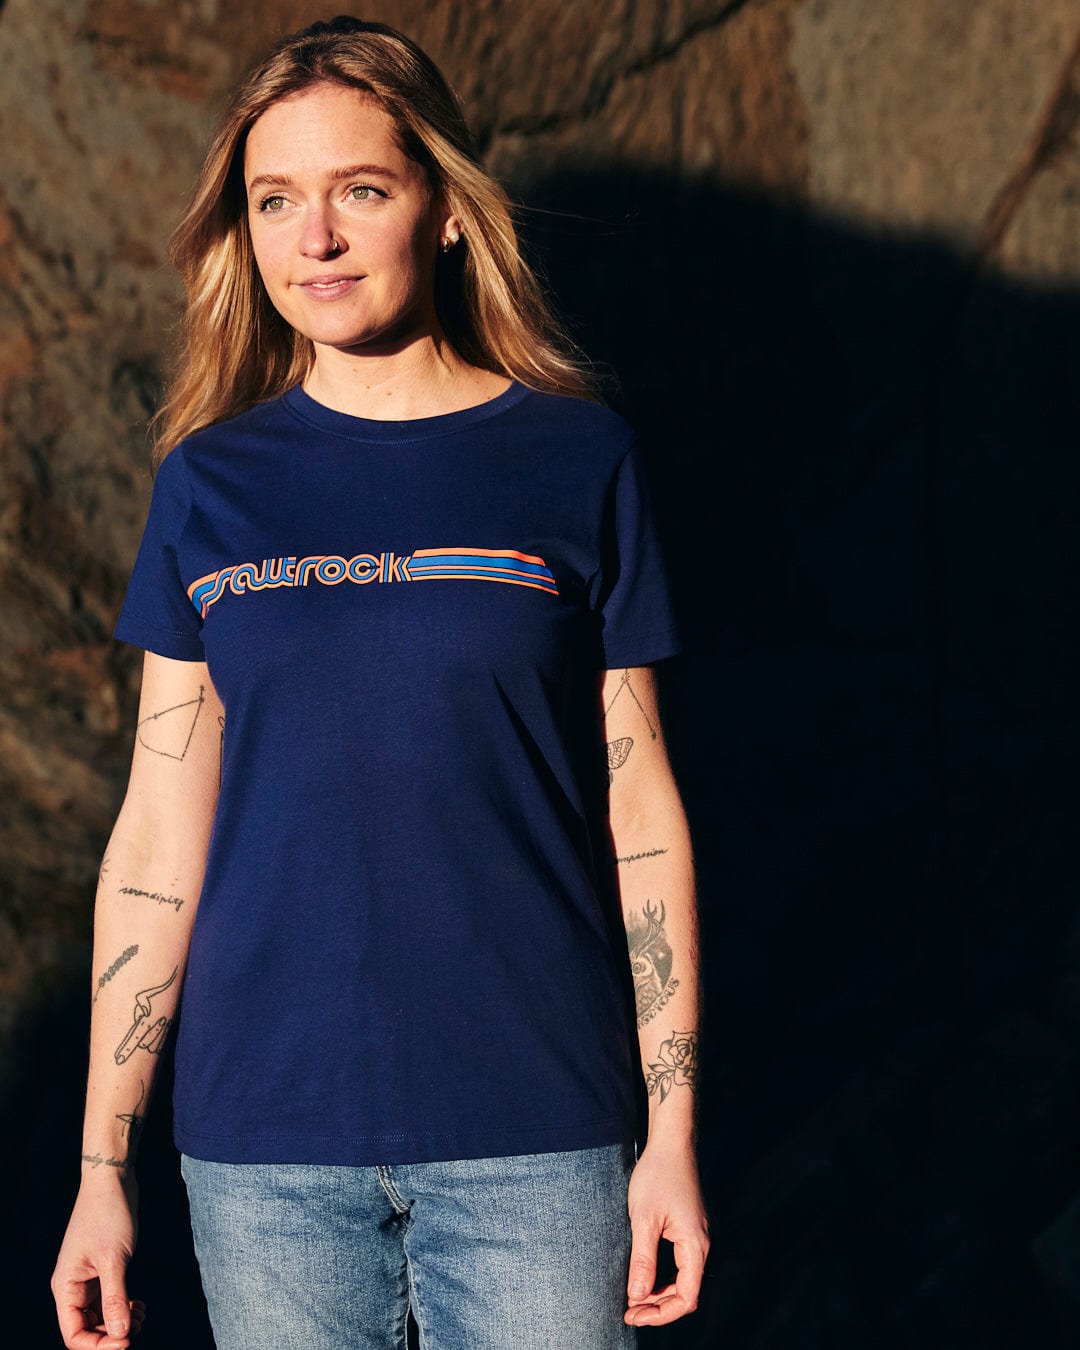 A woman wearing a Saltrock Retro Ribbon - Womens Short Sleeve T-Shirt - Dark Blue, a blue t - shirt with retro stripes, standing in front of a rock.